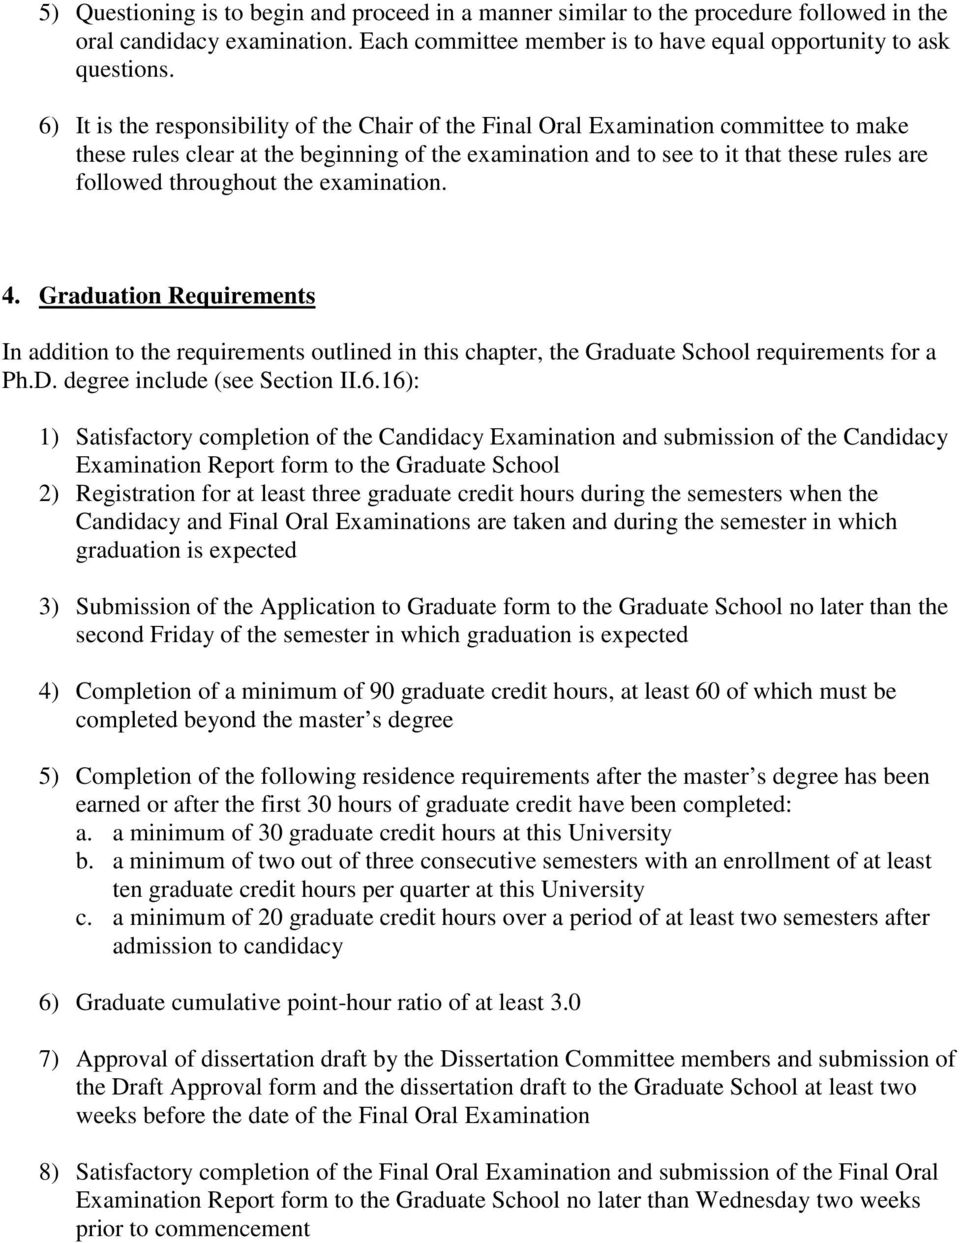 throughout the examination. 4. Graduation Requirements In addition to the requirements outlined in this chapter, the Graduate School requirements for a Ph.D. degree include (see Section II.6.